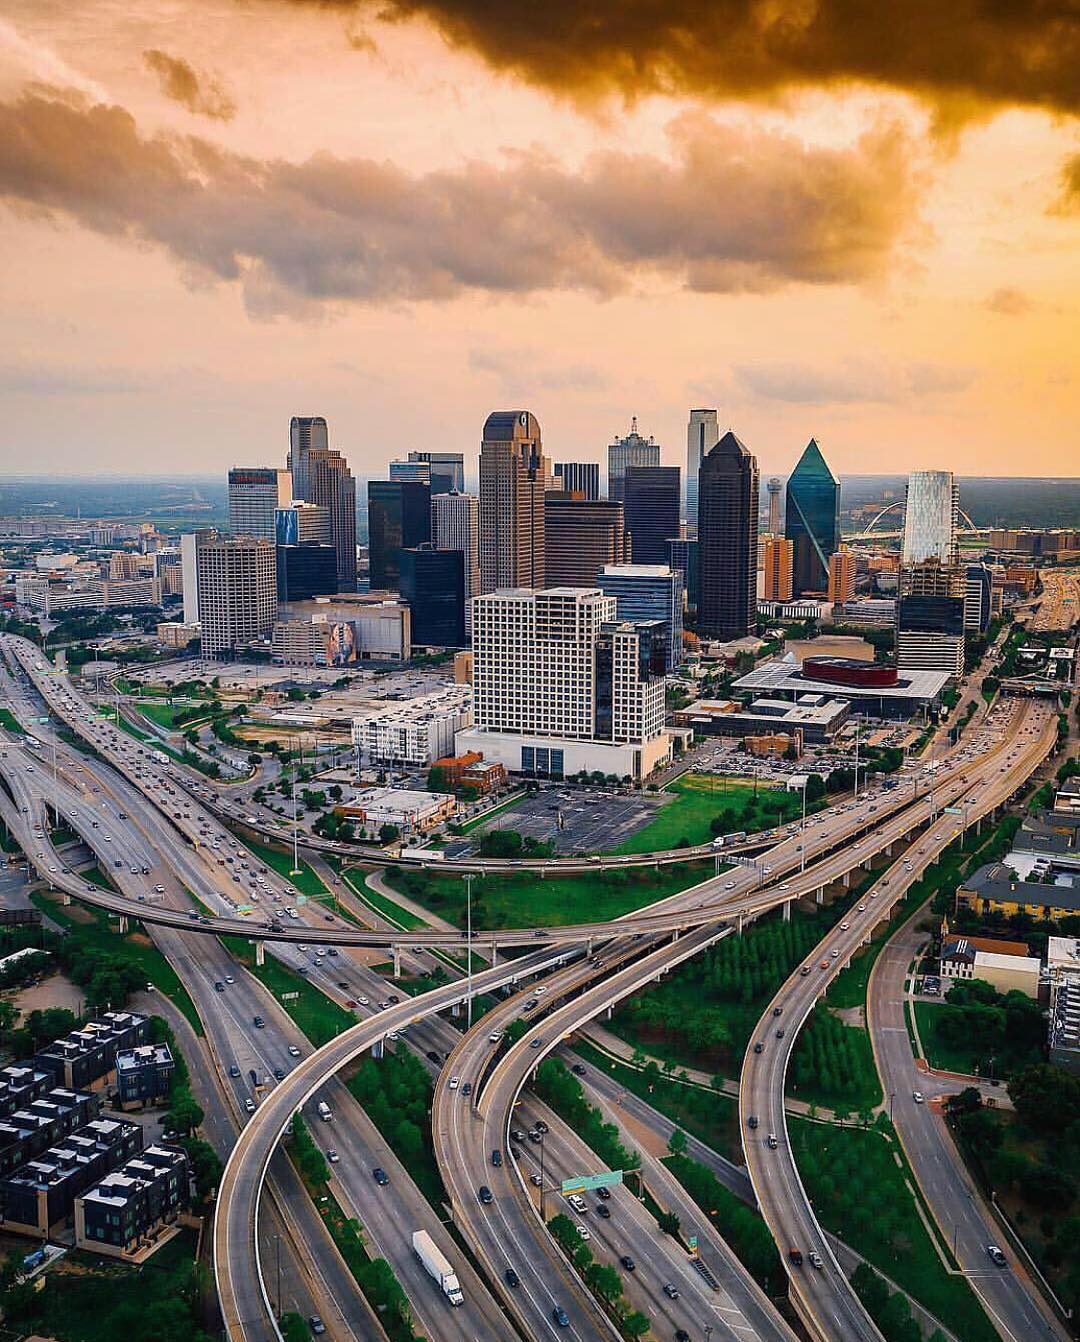 Aerial view of Dallas downtown and freeways at dusk Photo by Instagram user @dallascitypage